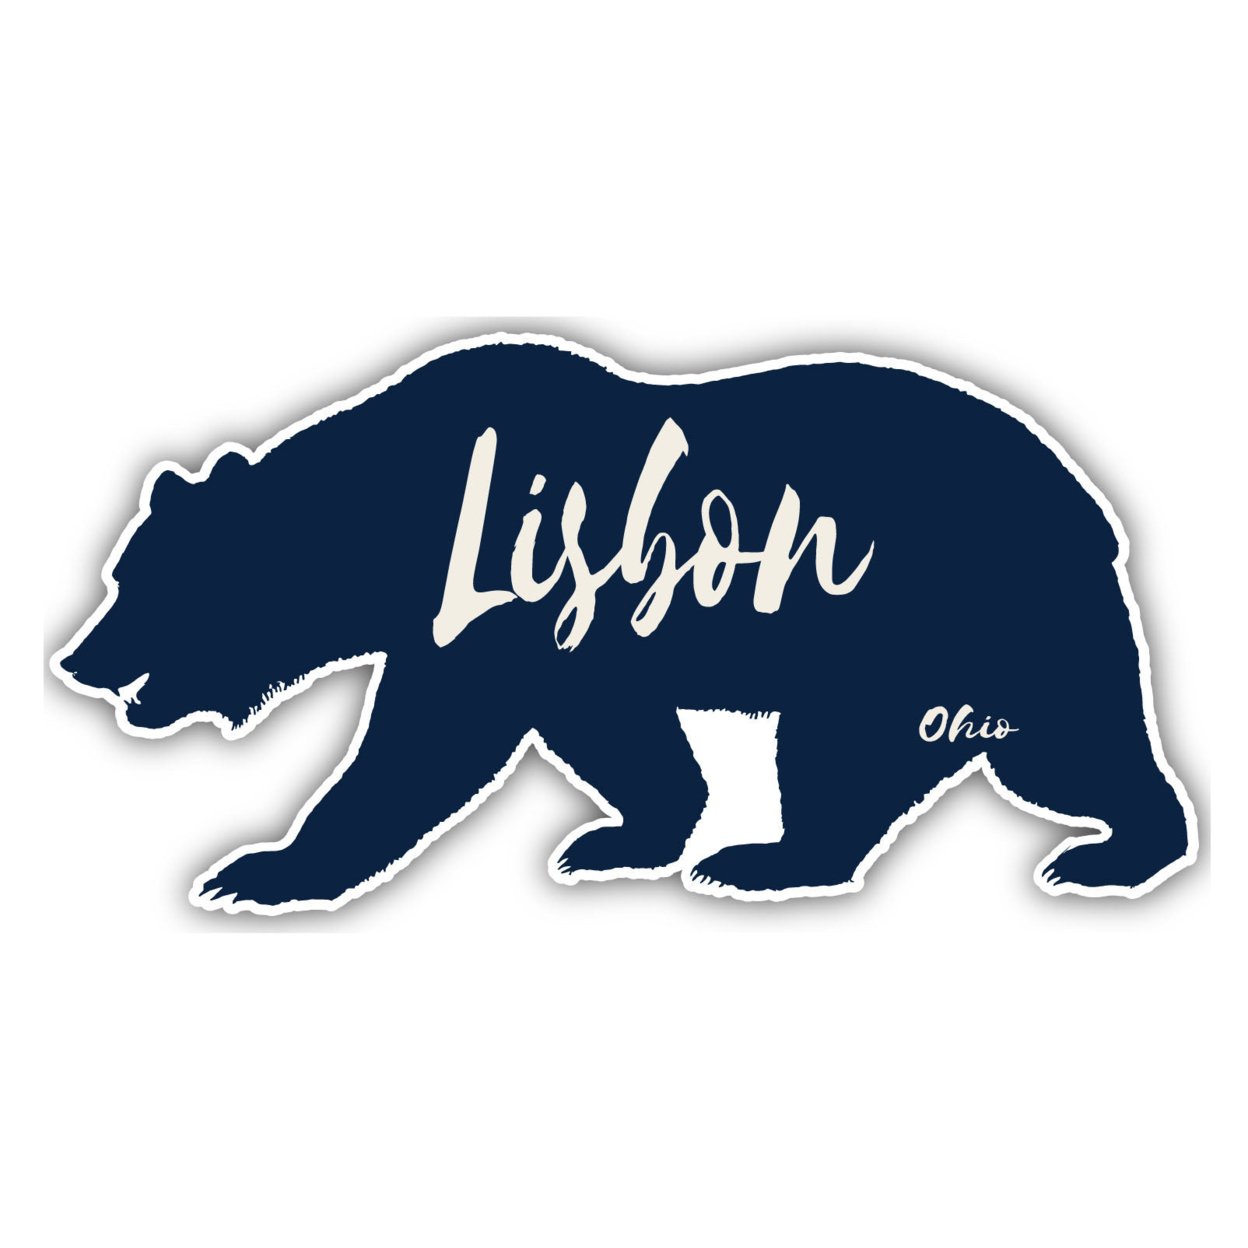 Lisbon Ohio Souvenir Decorative Stickers (Choose Theme And Size) - 2-Inch, Great Outdoors